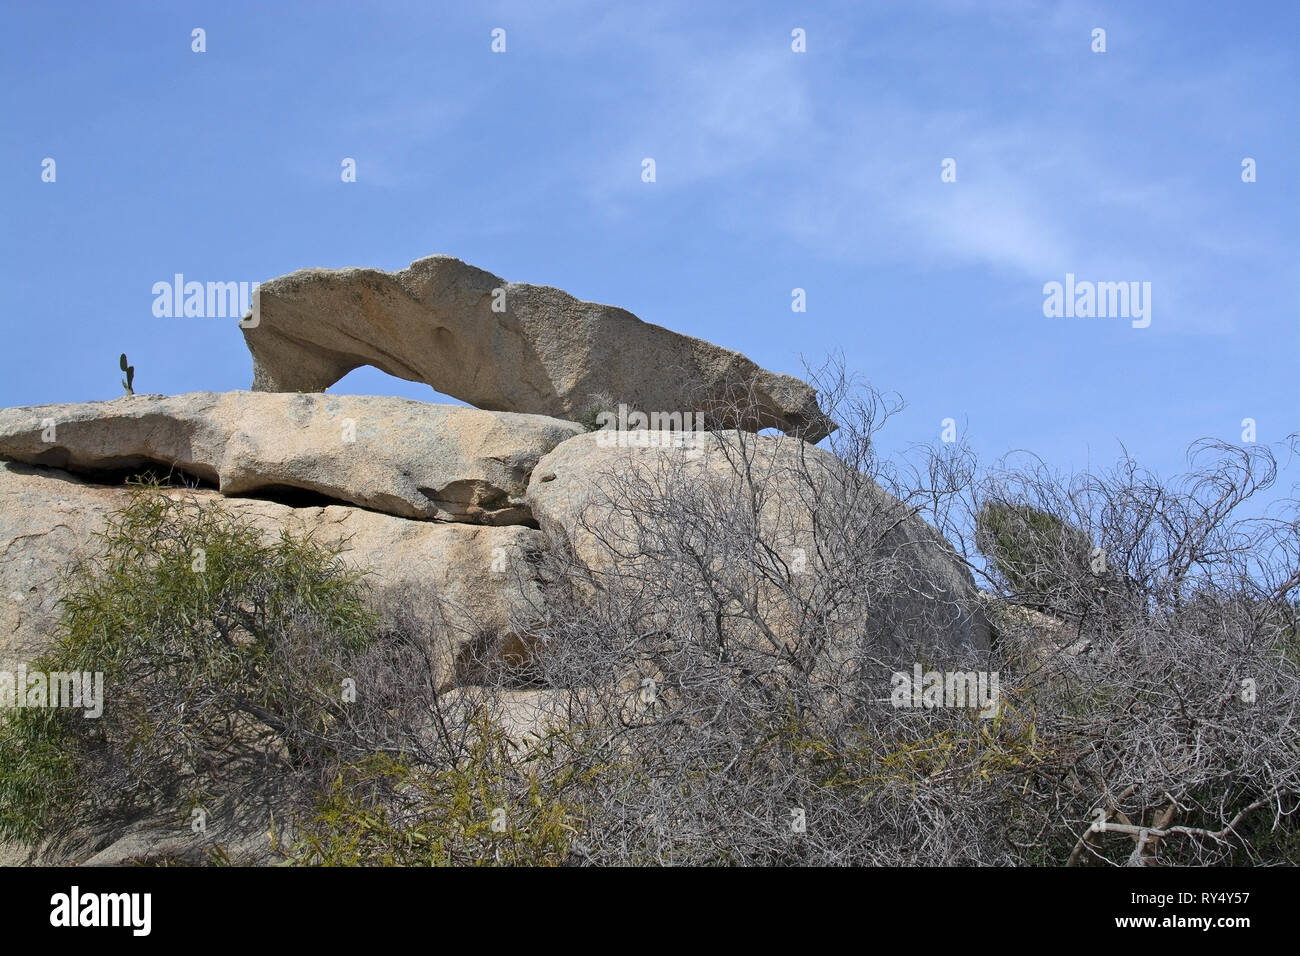 Slab of granite rock lying on top of eroded cliff with blue sky wispy cloud in Costa Smeralda, Sardinia, Italy. Stock Photo